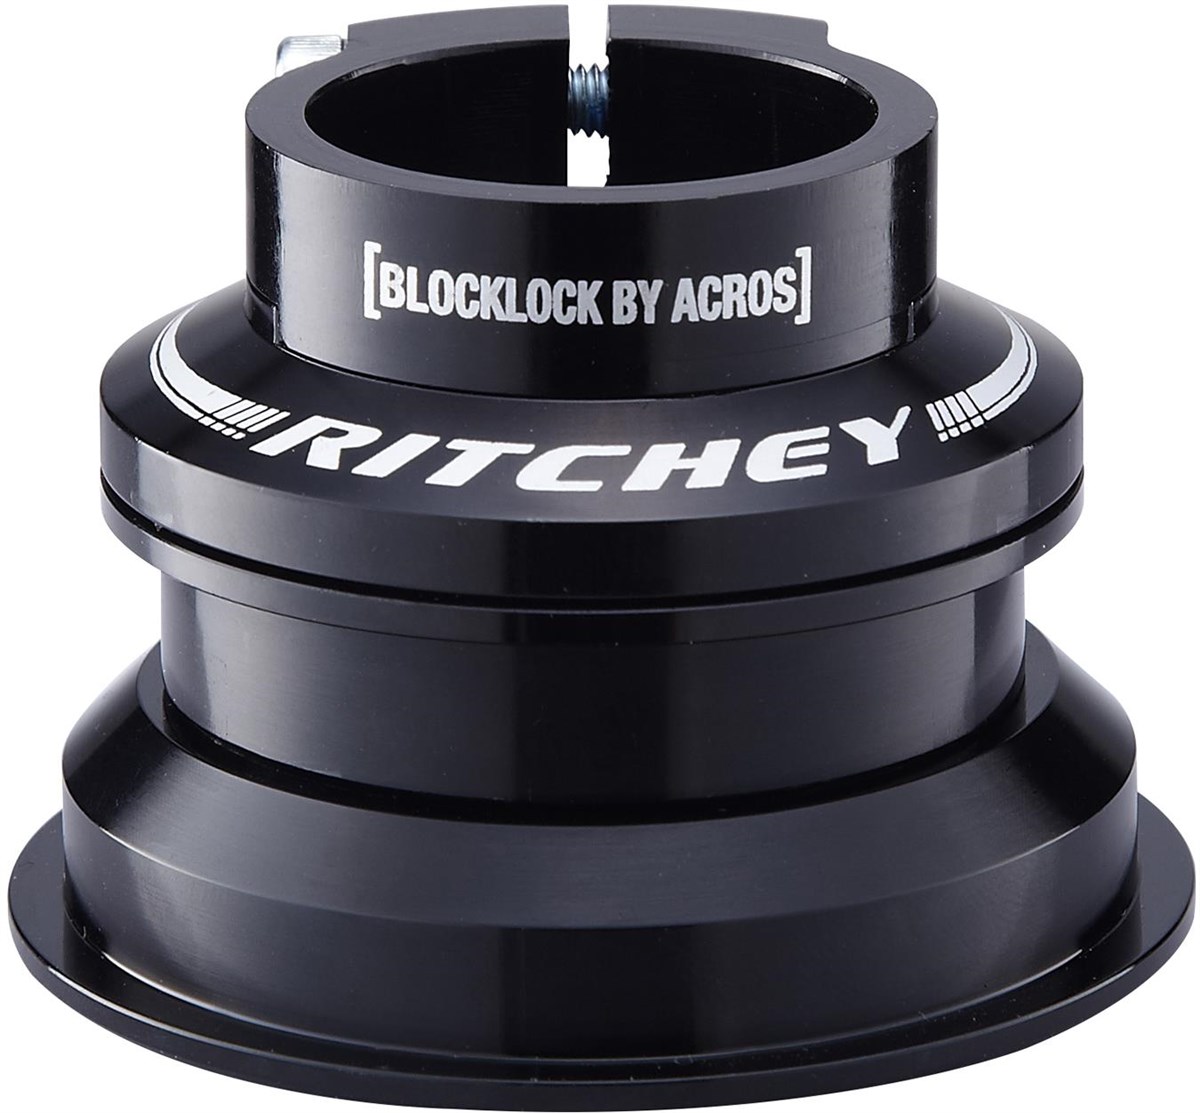 Ritchey Pro Press Fit Blocklock Tapered Headset product image